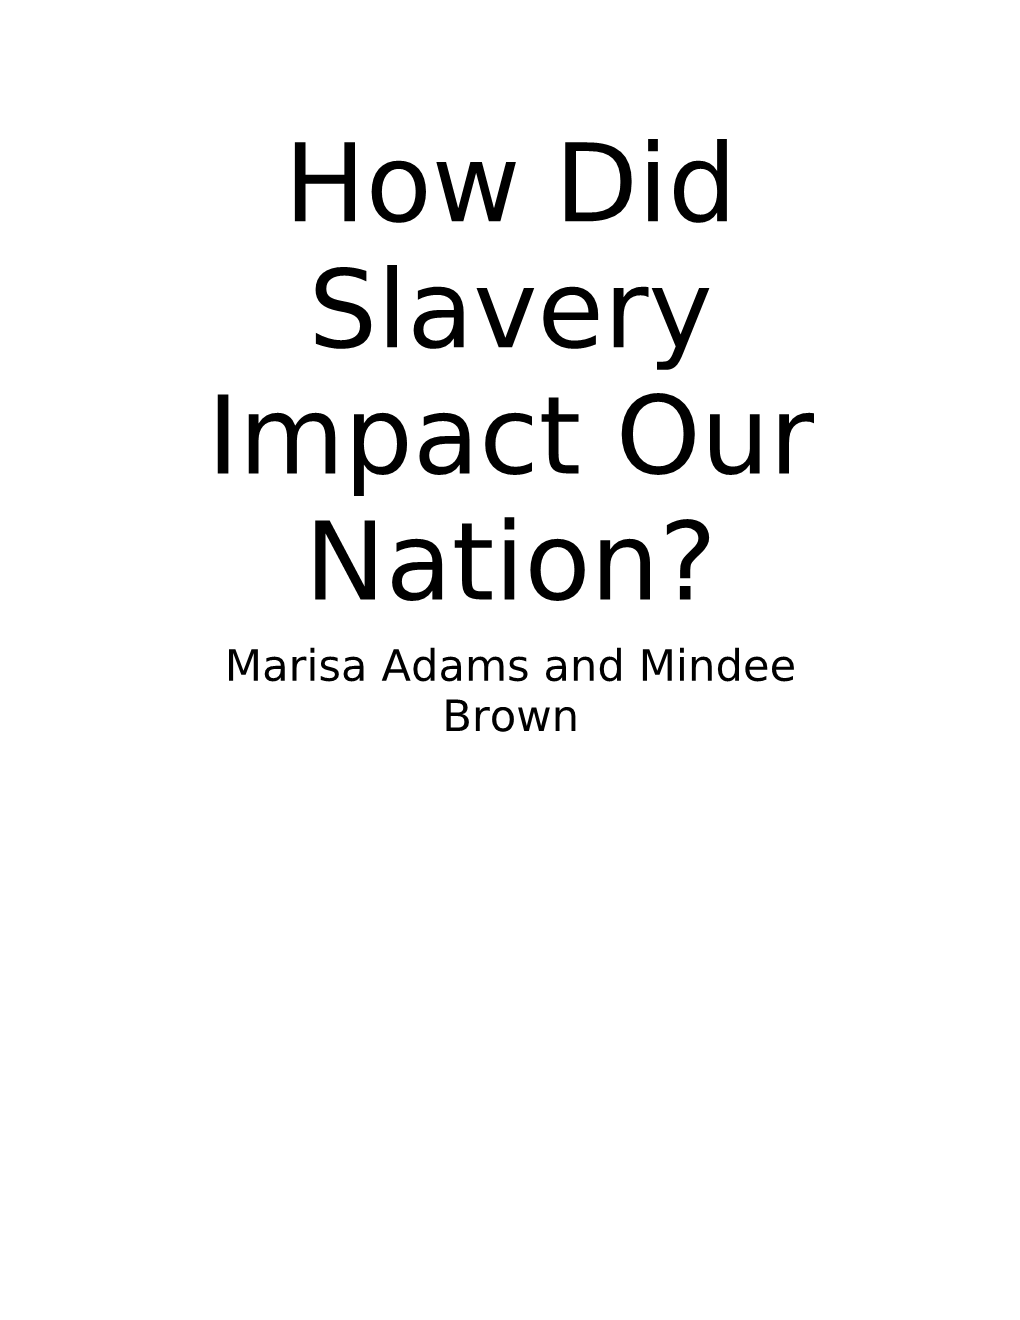 How Did Slavery Impact Our Nation